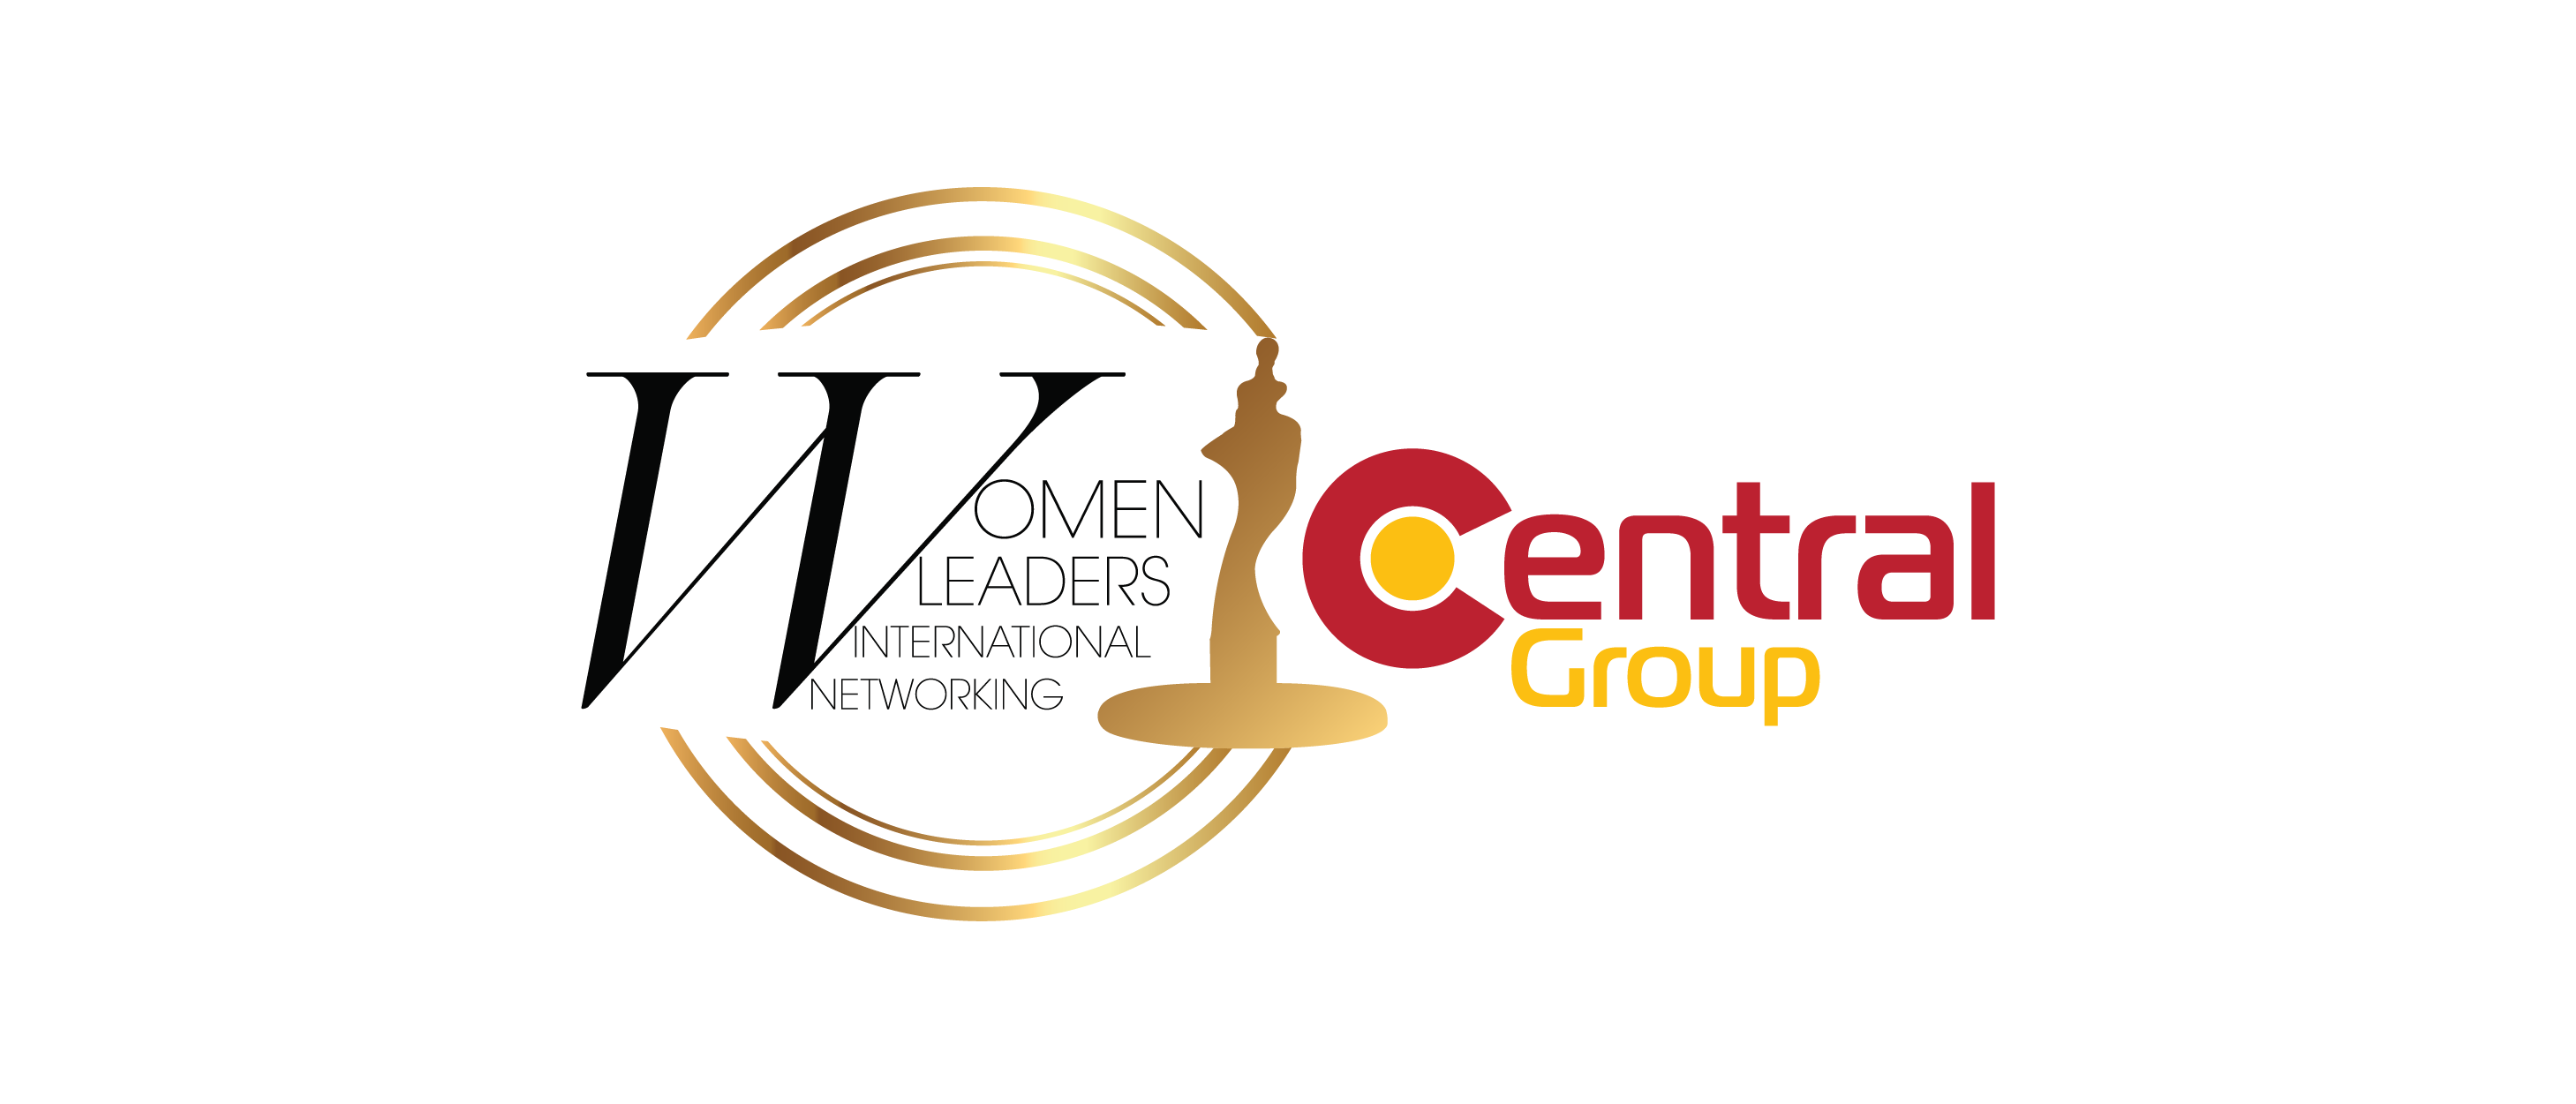   WLIN CENTRAL GROUP